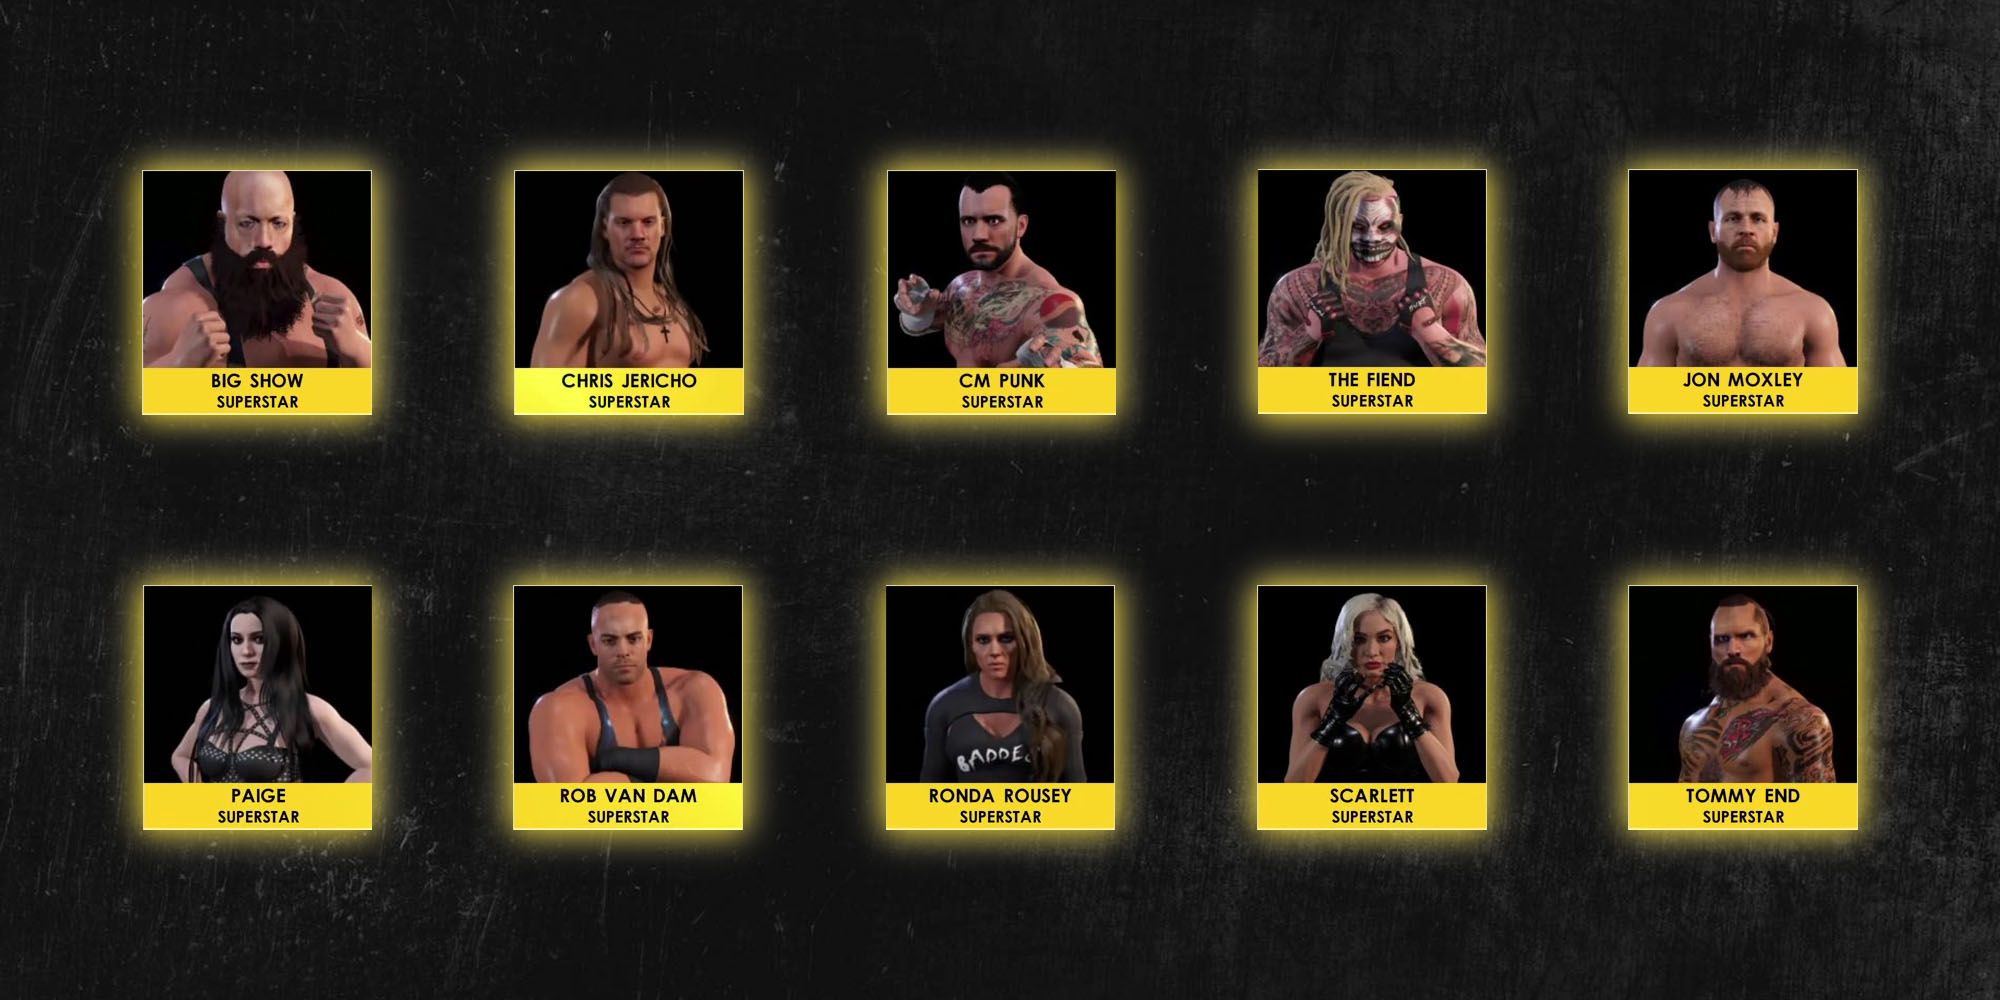 WWE 2K22's Full Roster and Ratings Revealed, Includes 35 Names